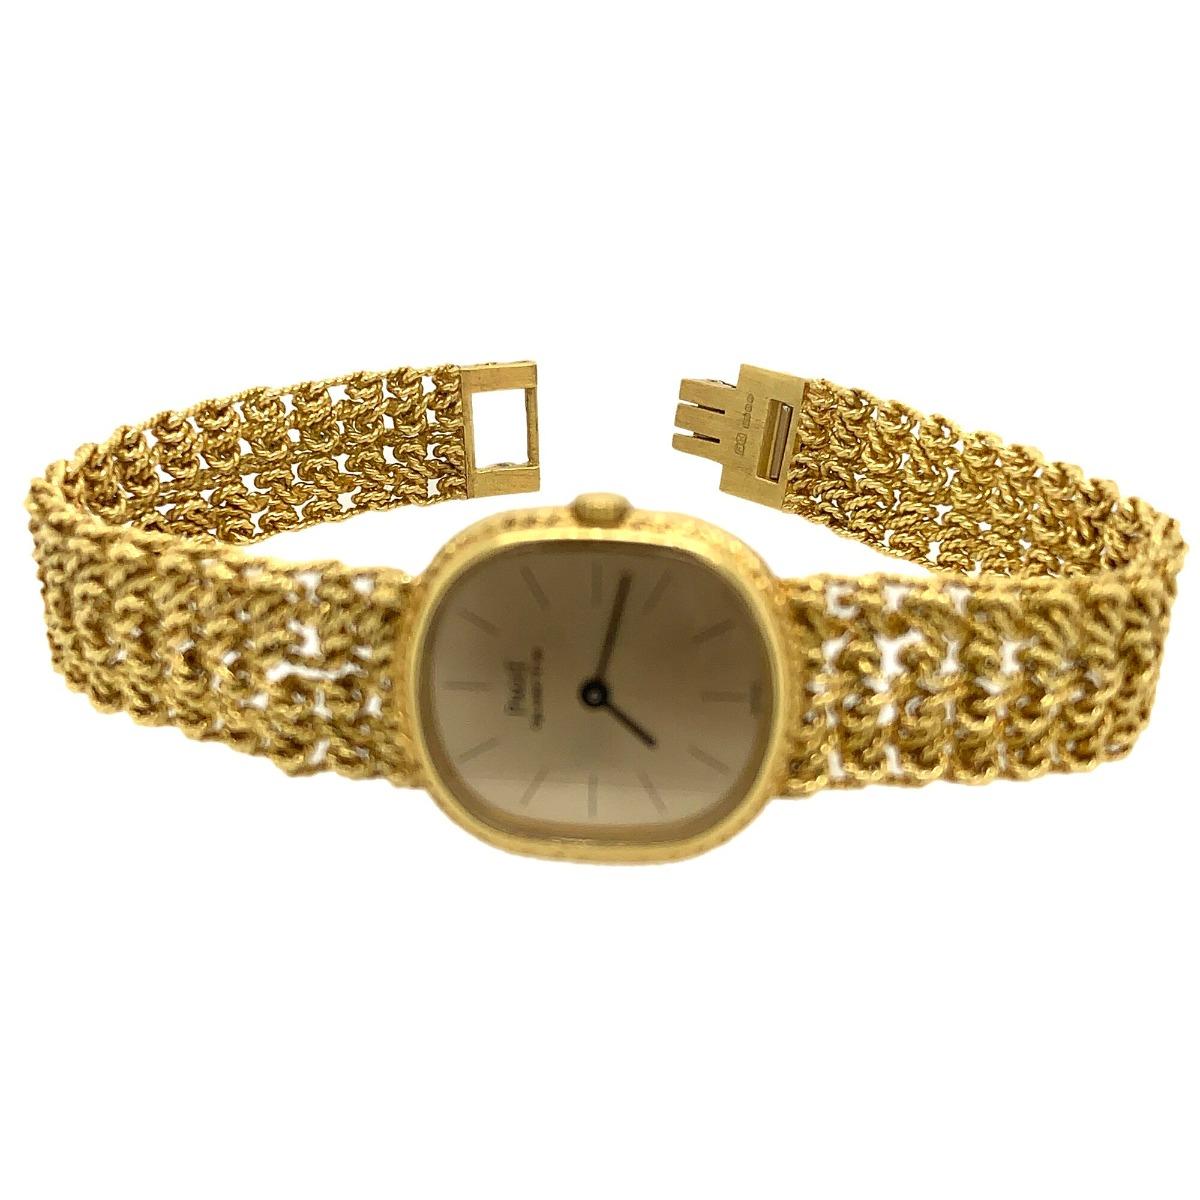 Brand: Piaget
Metal: 18k Yellow Gold
Excellent Condition
Length: 6.5 inch
Dial Width: 0.82 inch
Weight: 32.6 grams